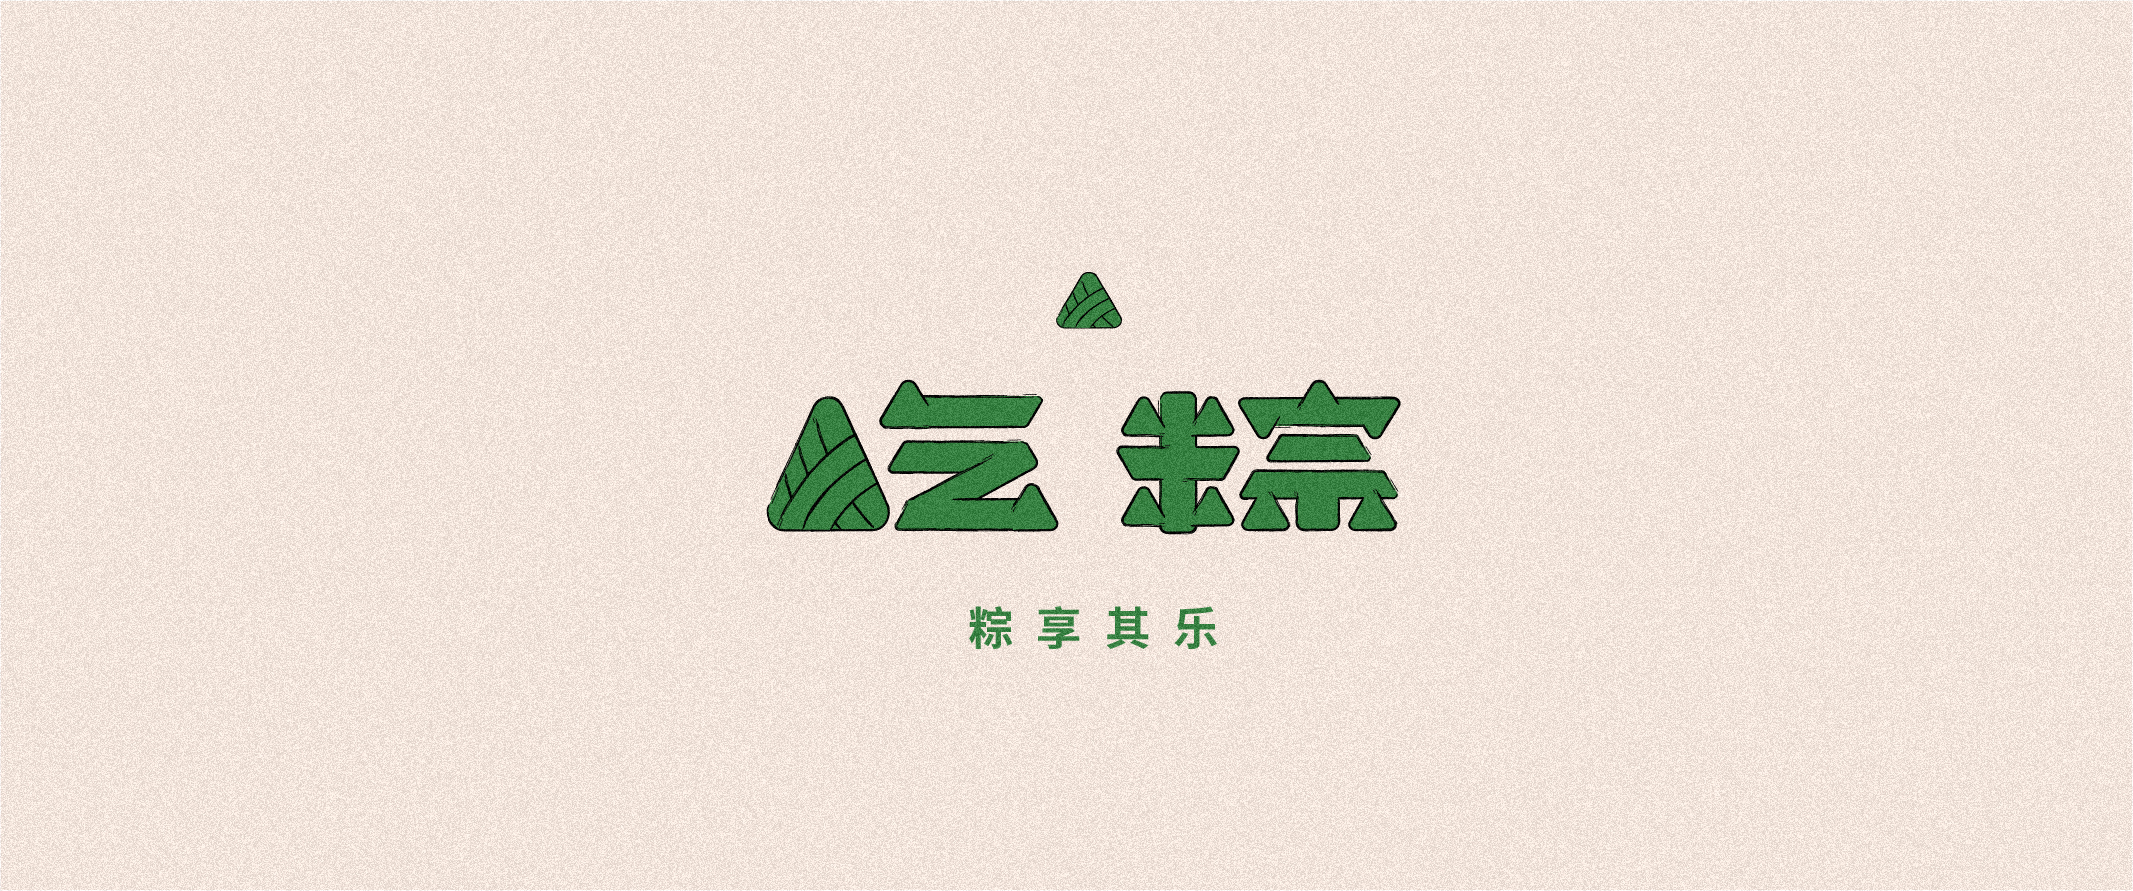 33P Chinese font design collection inspiration #.119